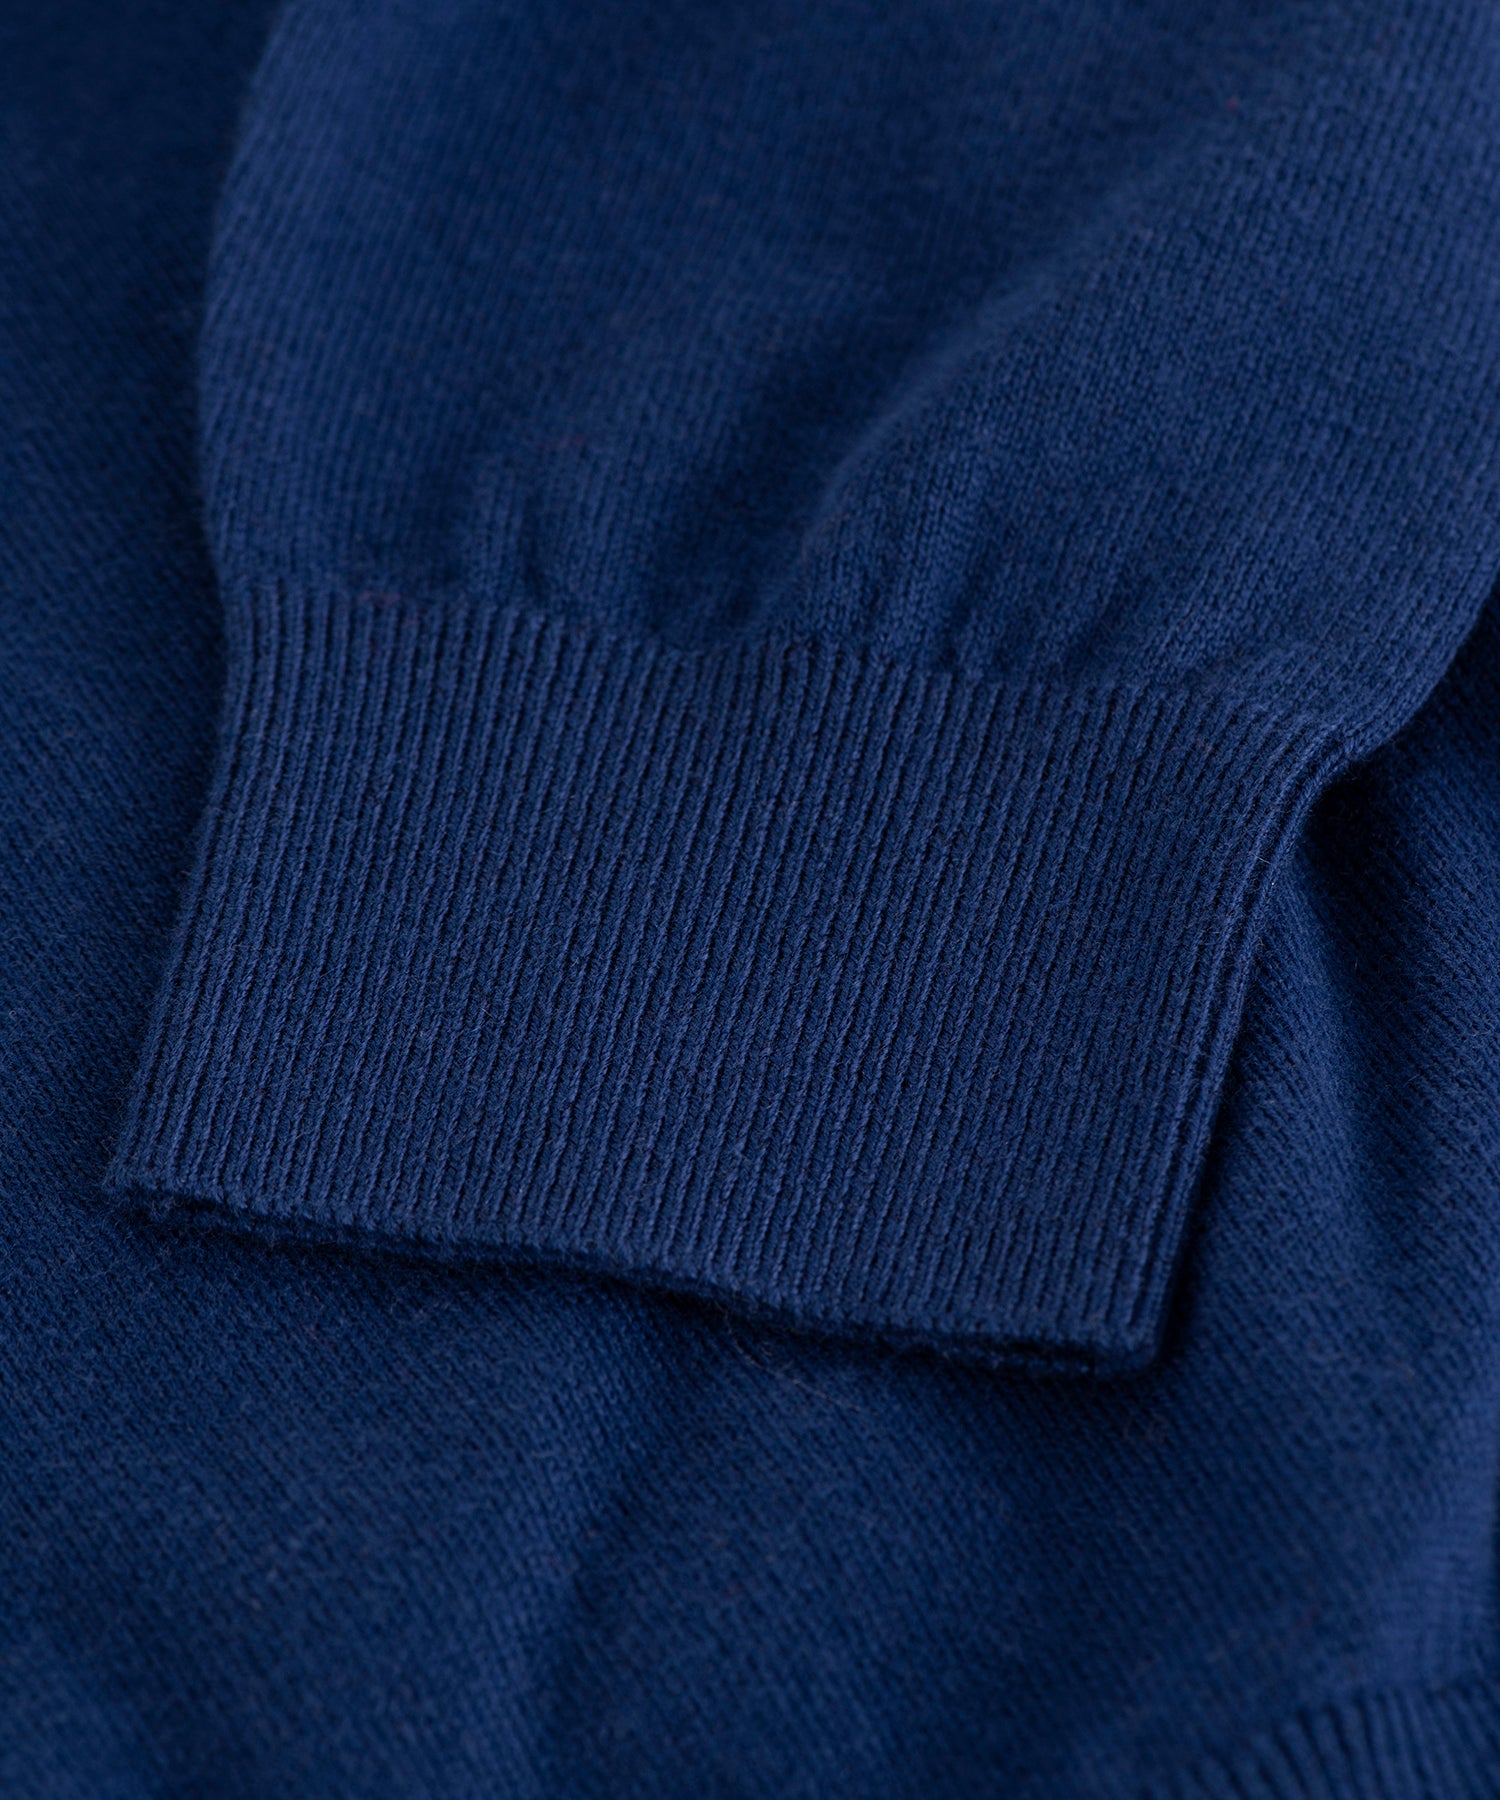 PULLOVER V-NECK CO WS L / Donkerblauw